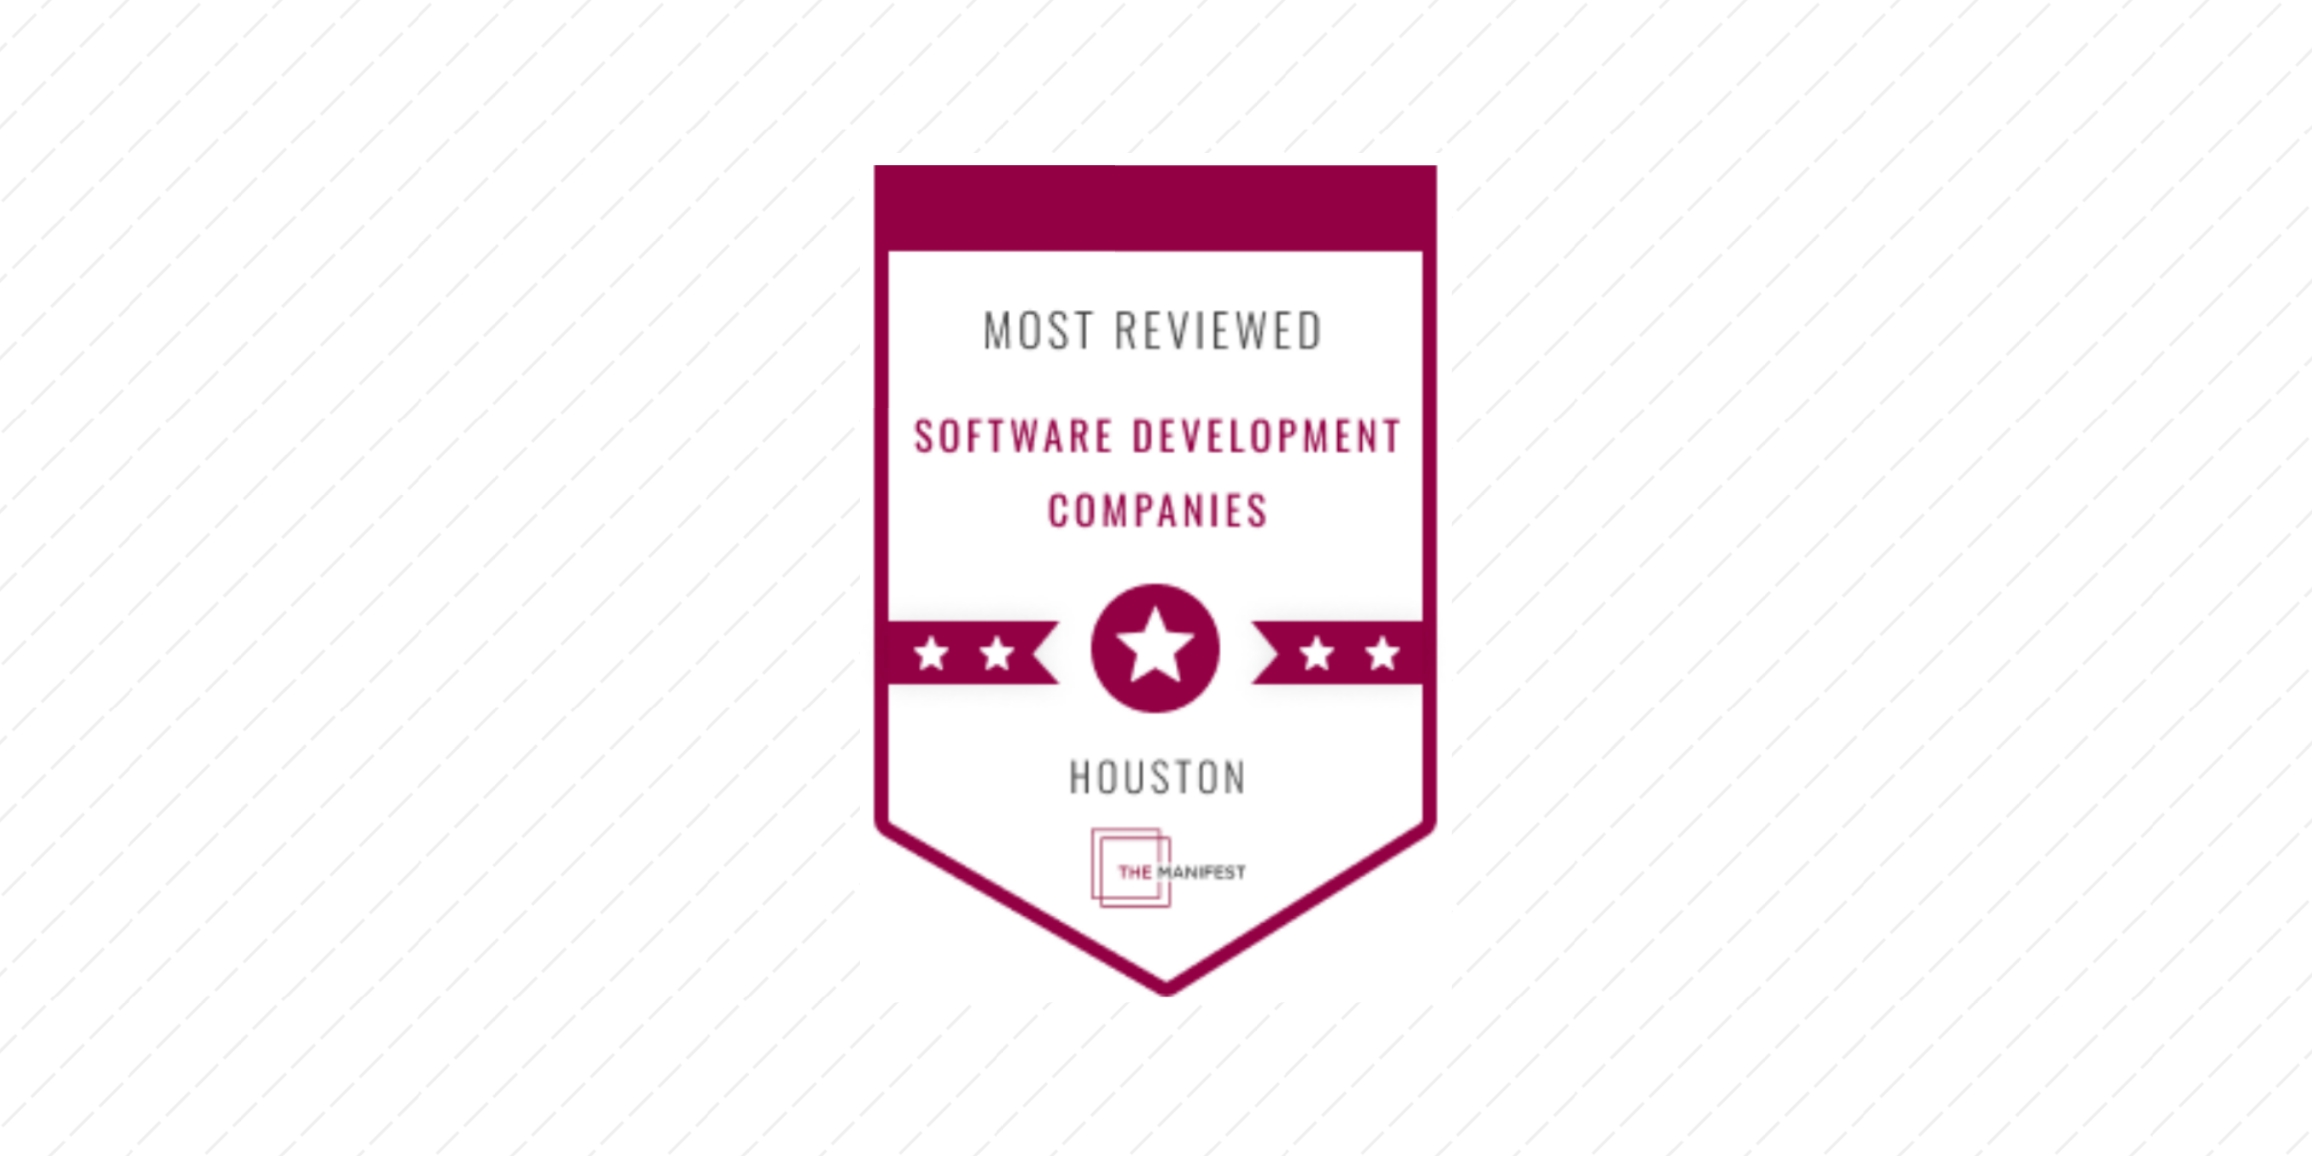 Recognized as Houston’s Best Reviewed Software Developer for 2022